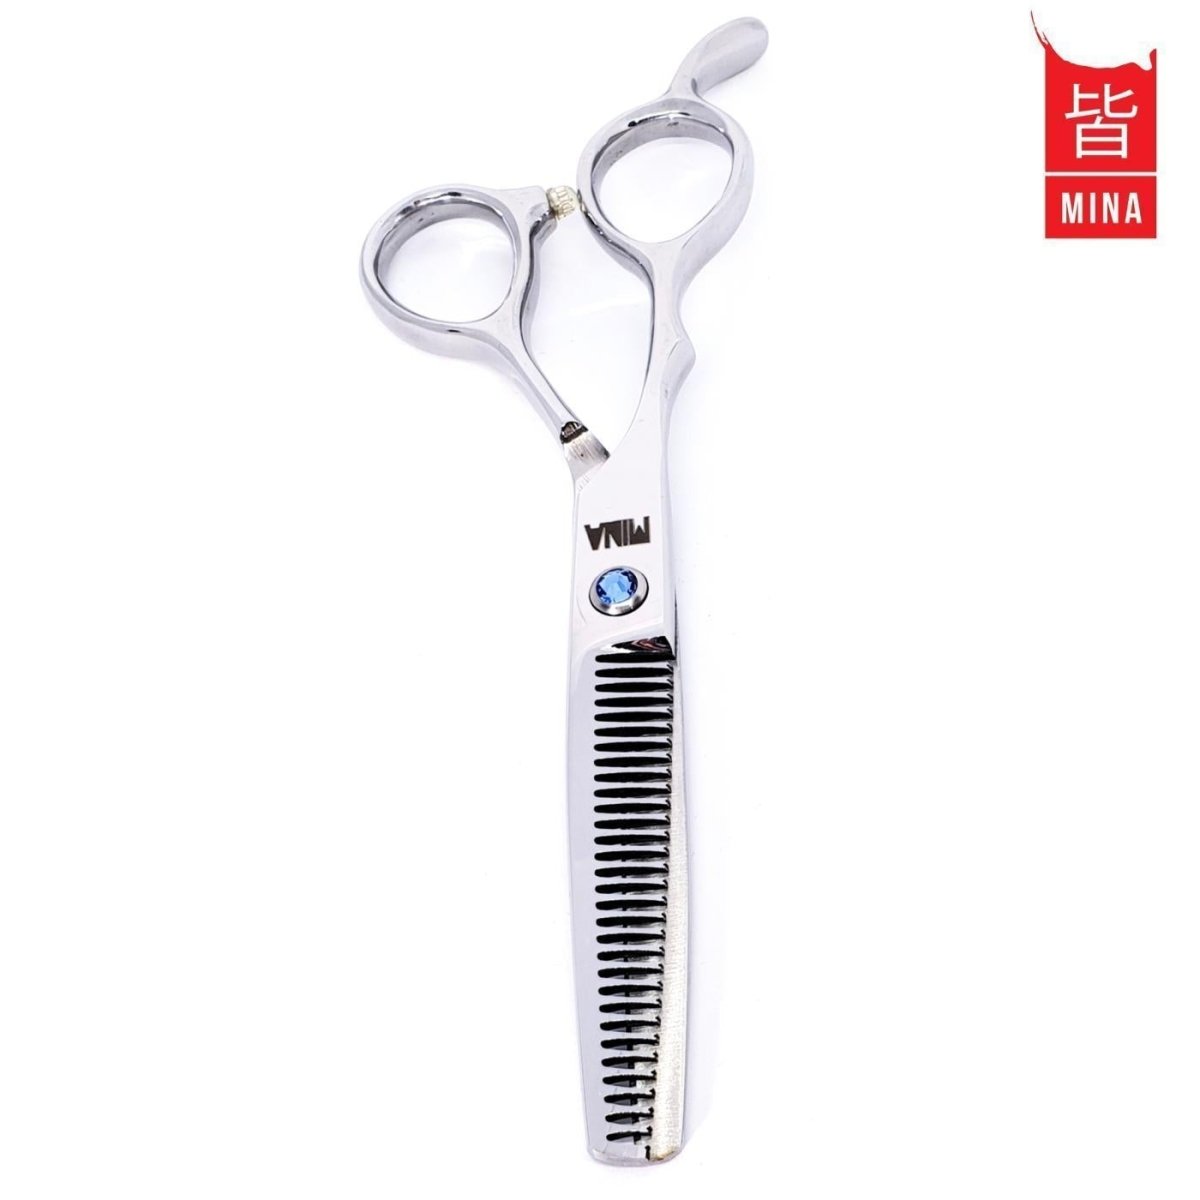 The Mina Umi hair thinning scissors for professional hairdressers